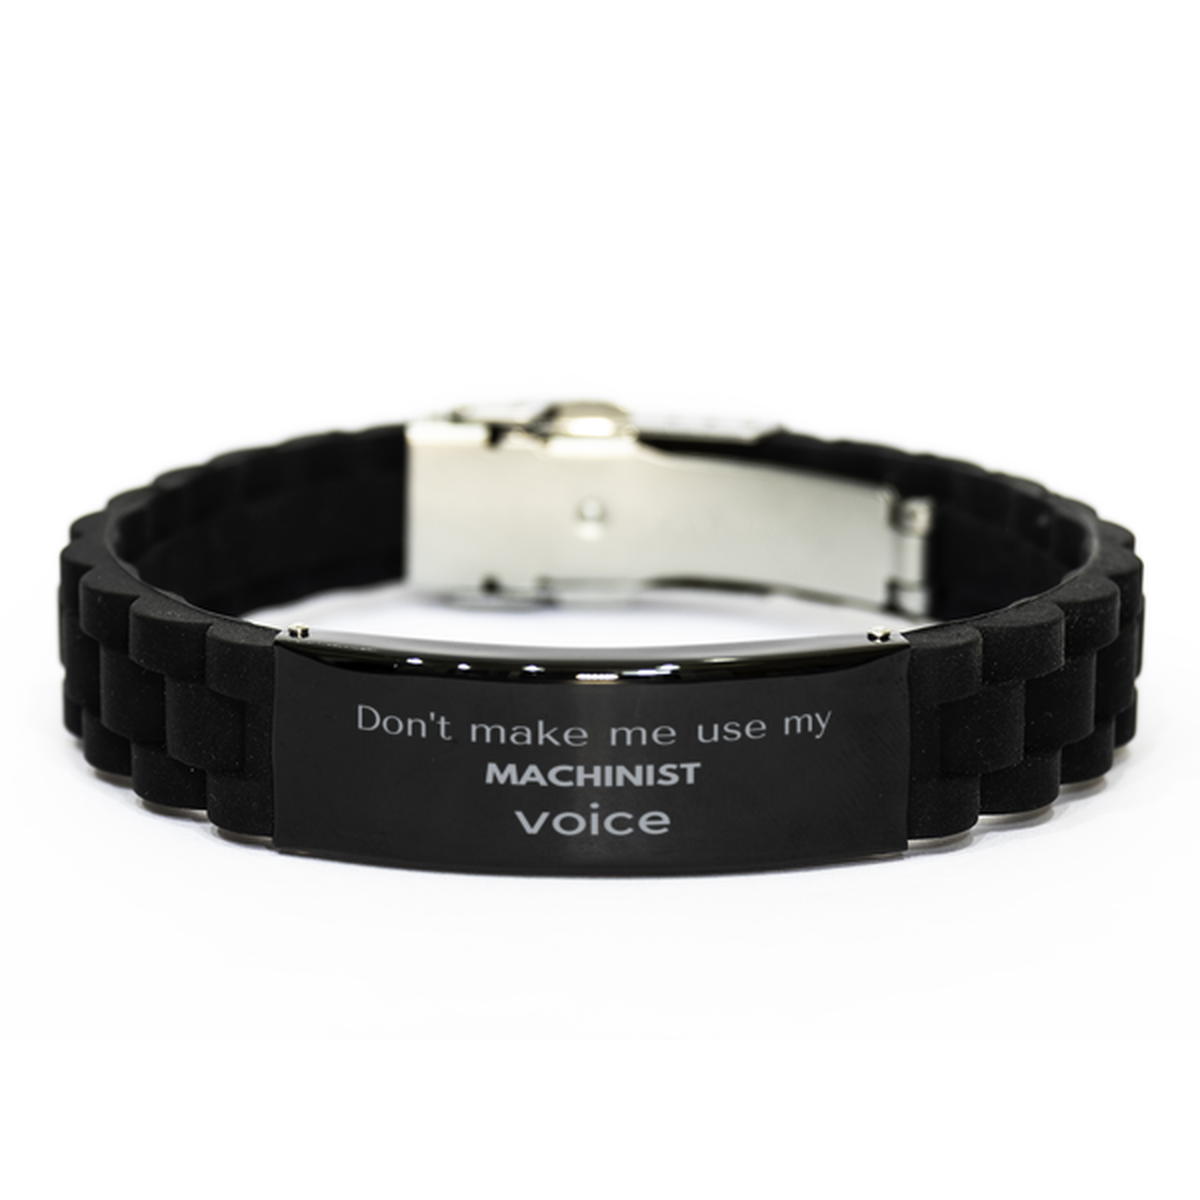 Don't make me use my Machinist voice, Sarcasm Machinist Gifts, Christmas Machinist Black Glidelock Clasp Bracelet Birthday Unique Gifts For Machinist Coworkers, Men, Women, Colleague, Friends